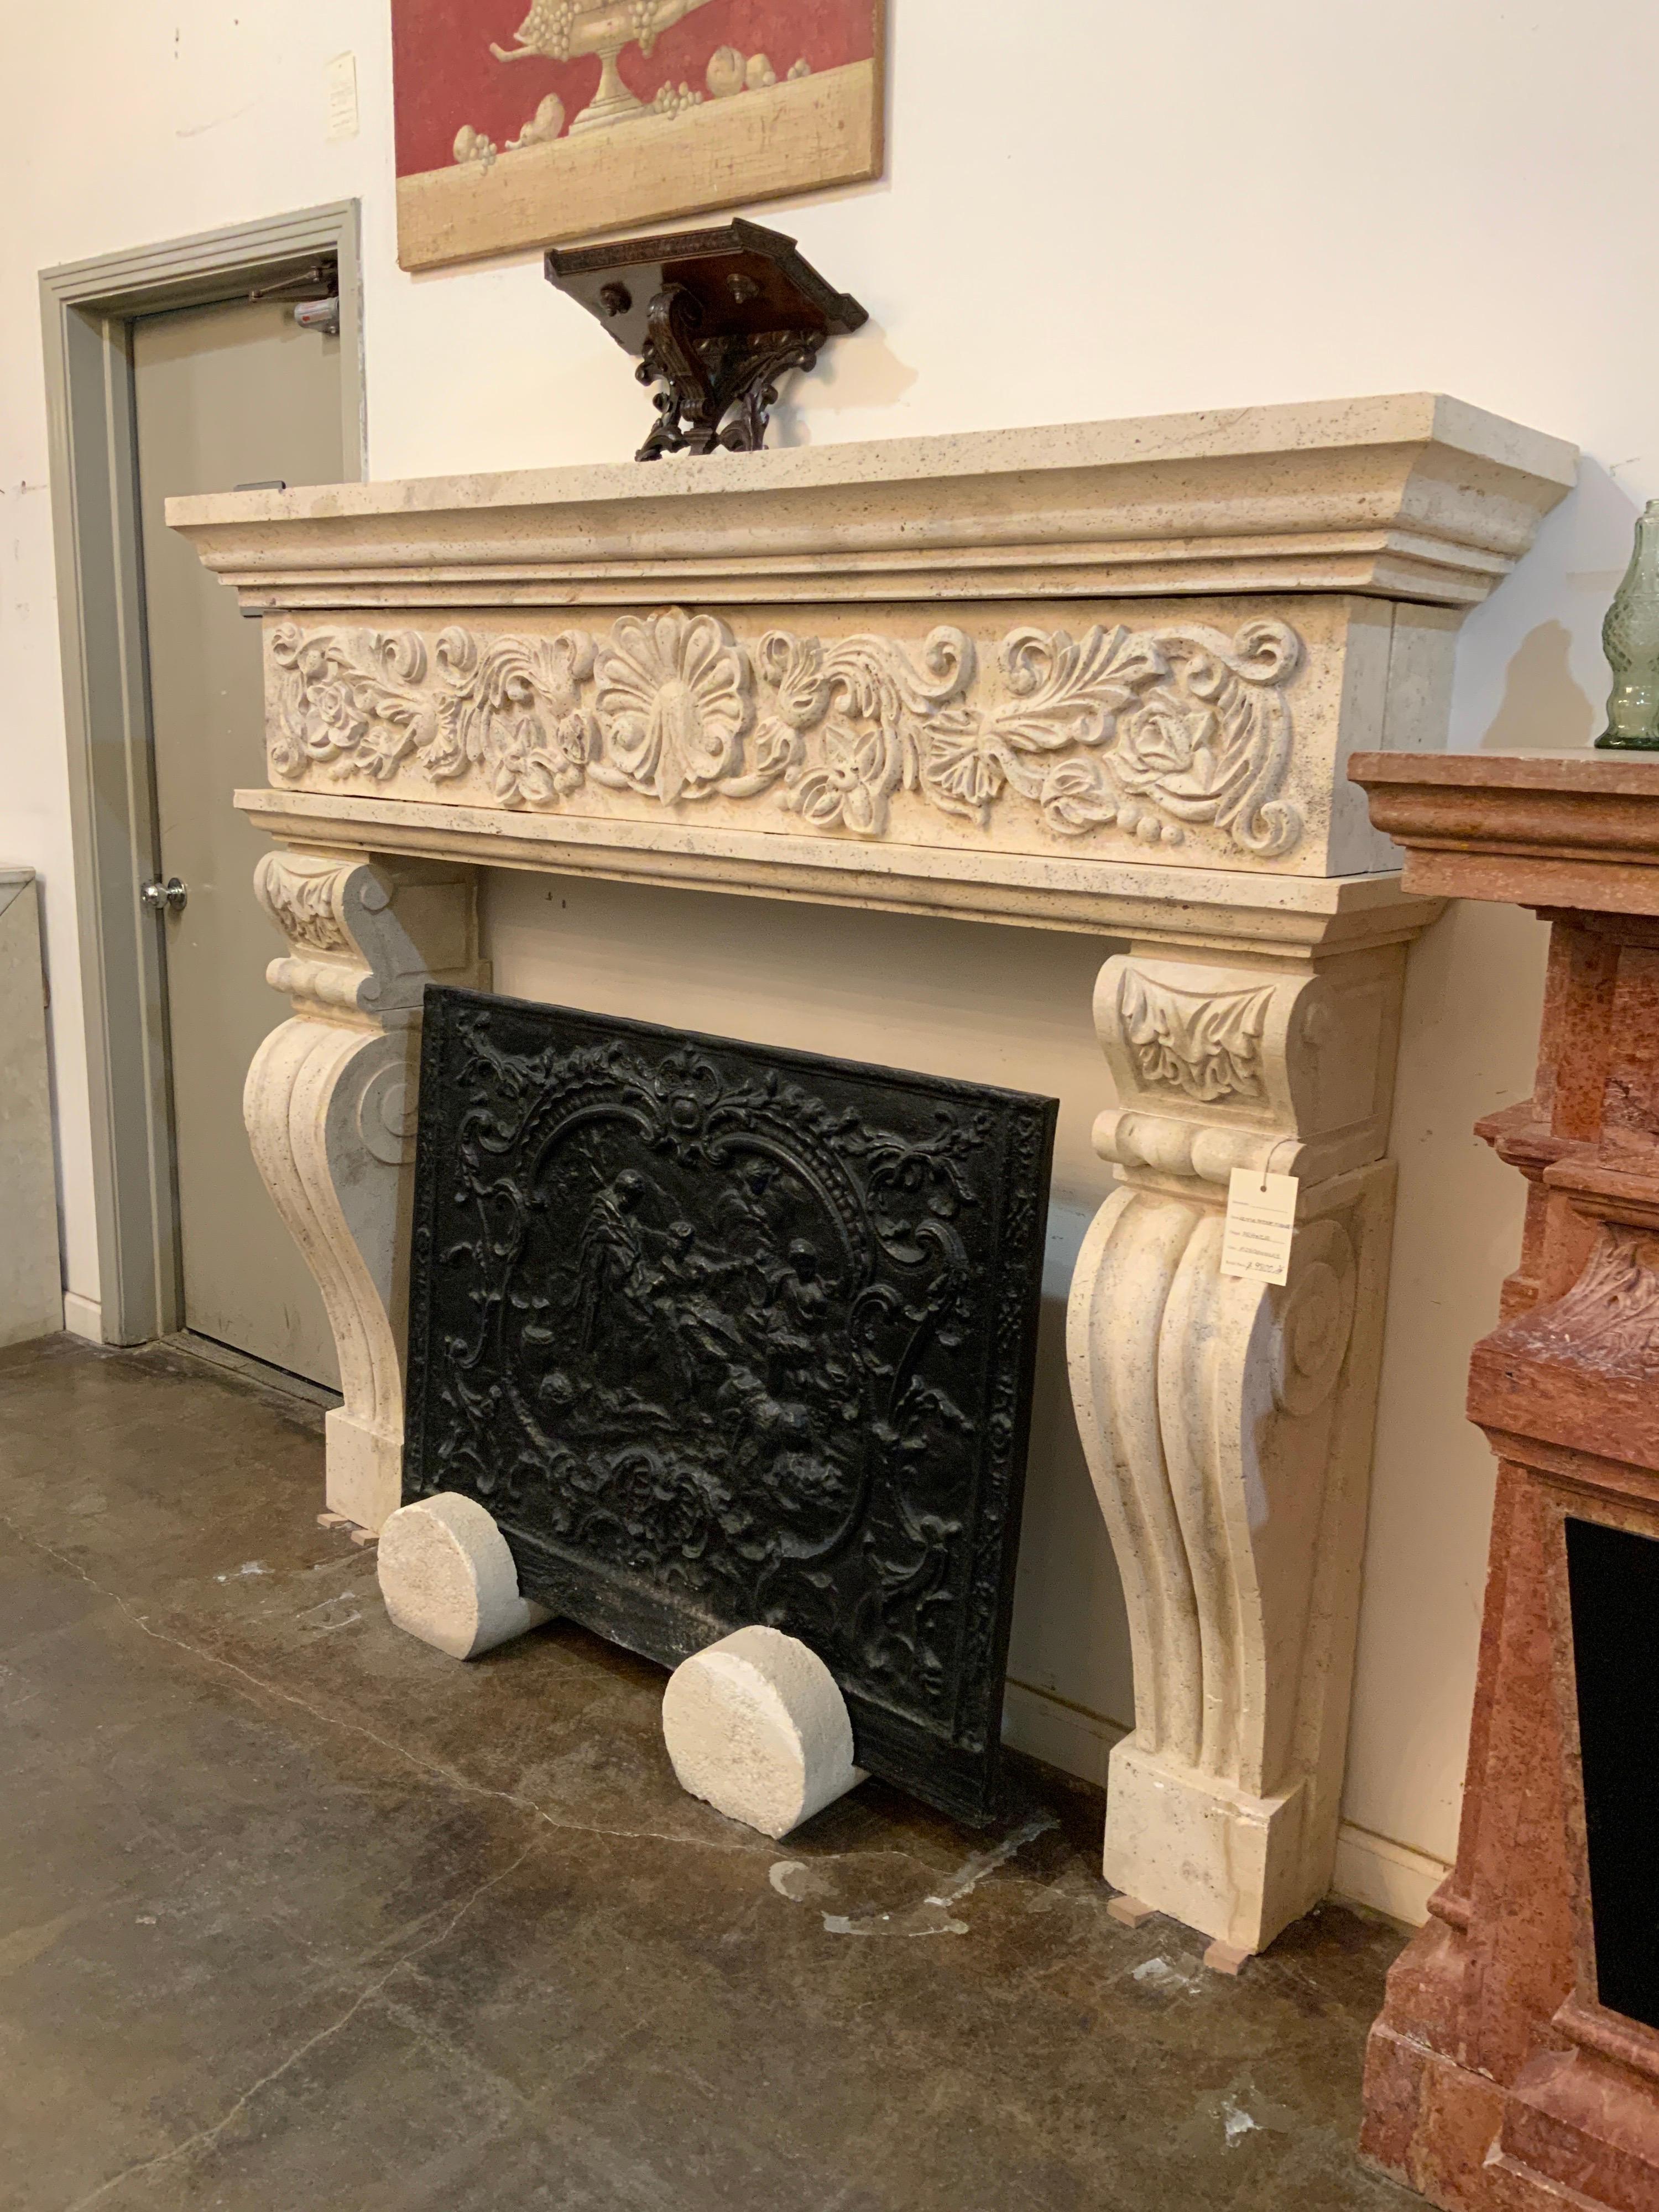 This limestone mantel origins from France.

Midcentury period.

Firebox measurements: 50.75